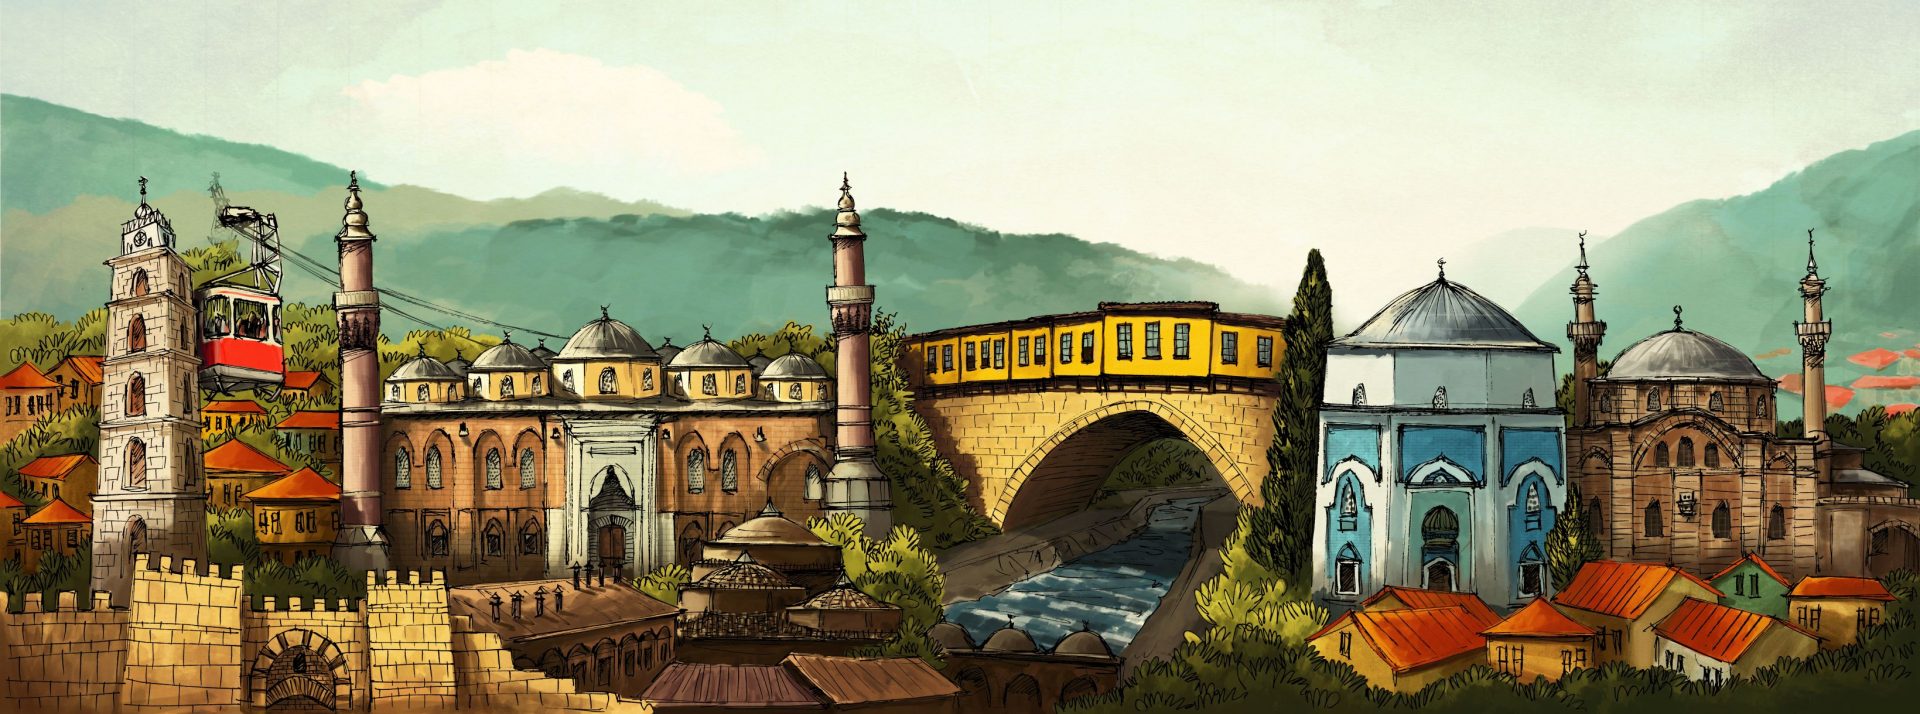 Explore the historical sites of Bursa, including ancient ruins, city walls, and significant buildings from the Ottoman era